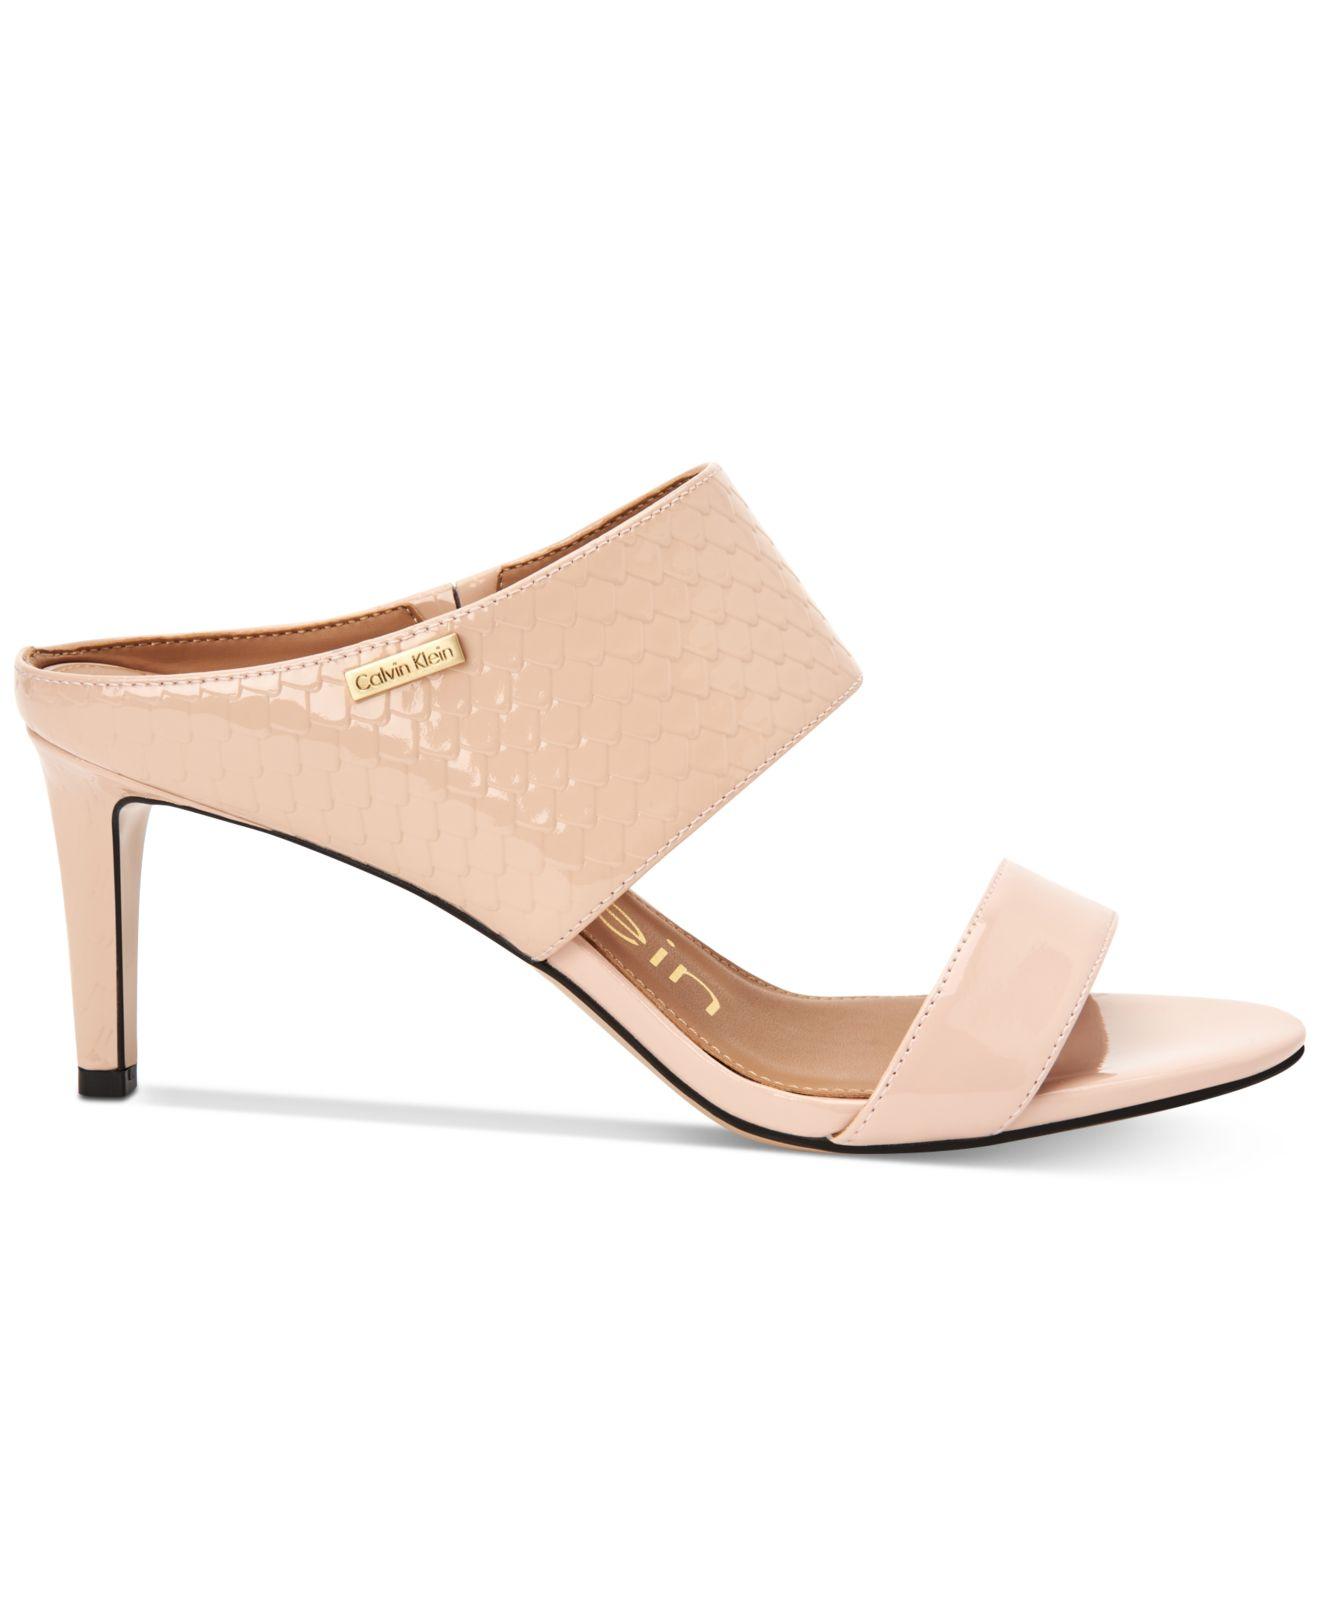 Calvin Klein Cecily Slip On Heeled Dress Sandals in Natural | Lyst